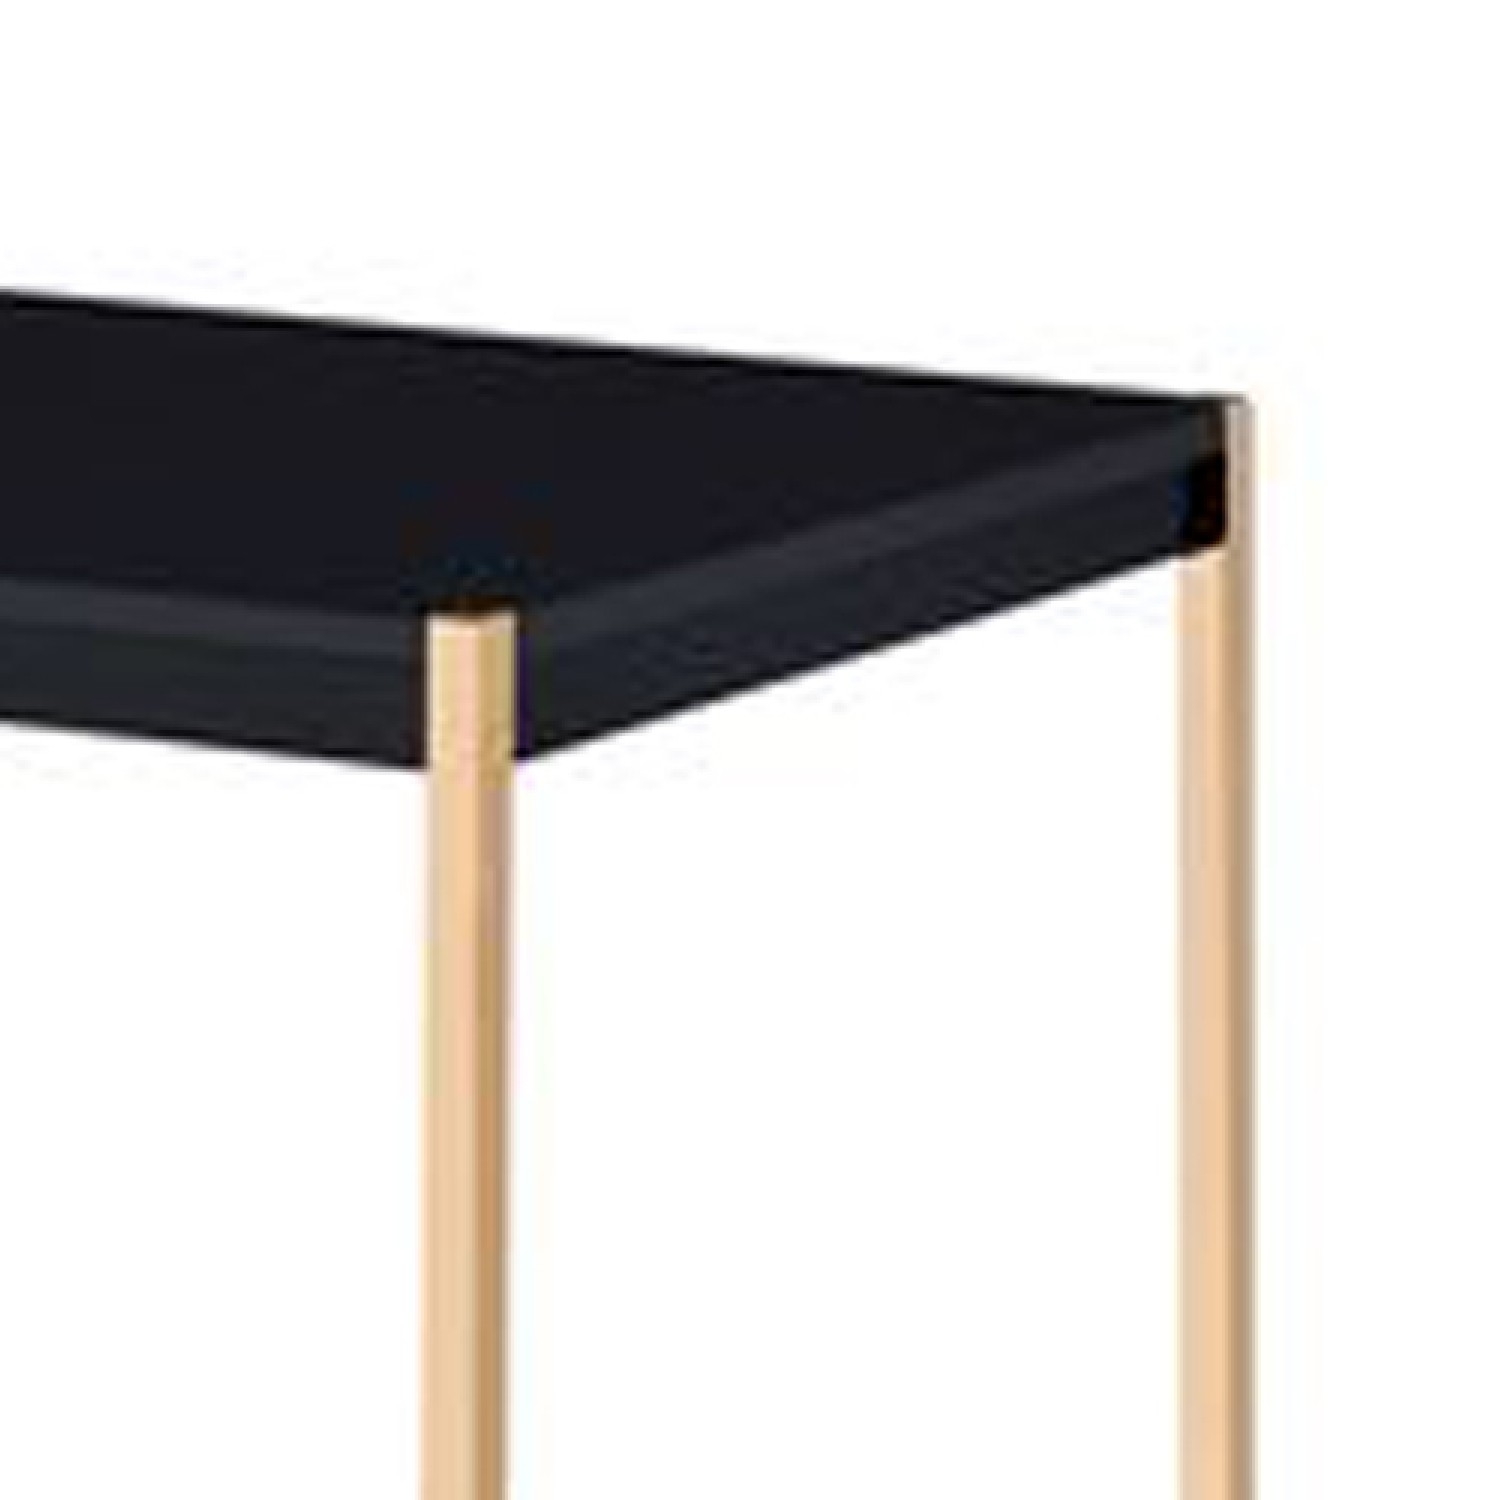 Writing Desk With USB Dock And Metal Legs, Black And Rose Gold- Saltoro Sherpi